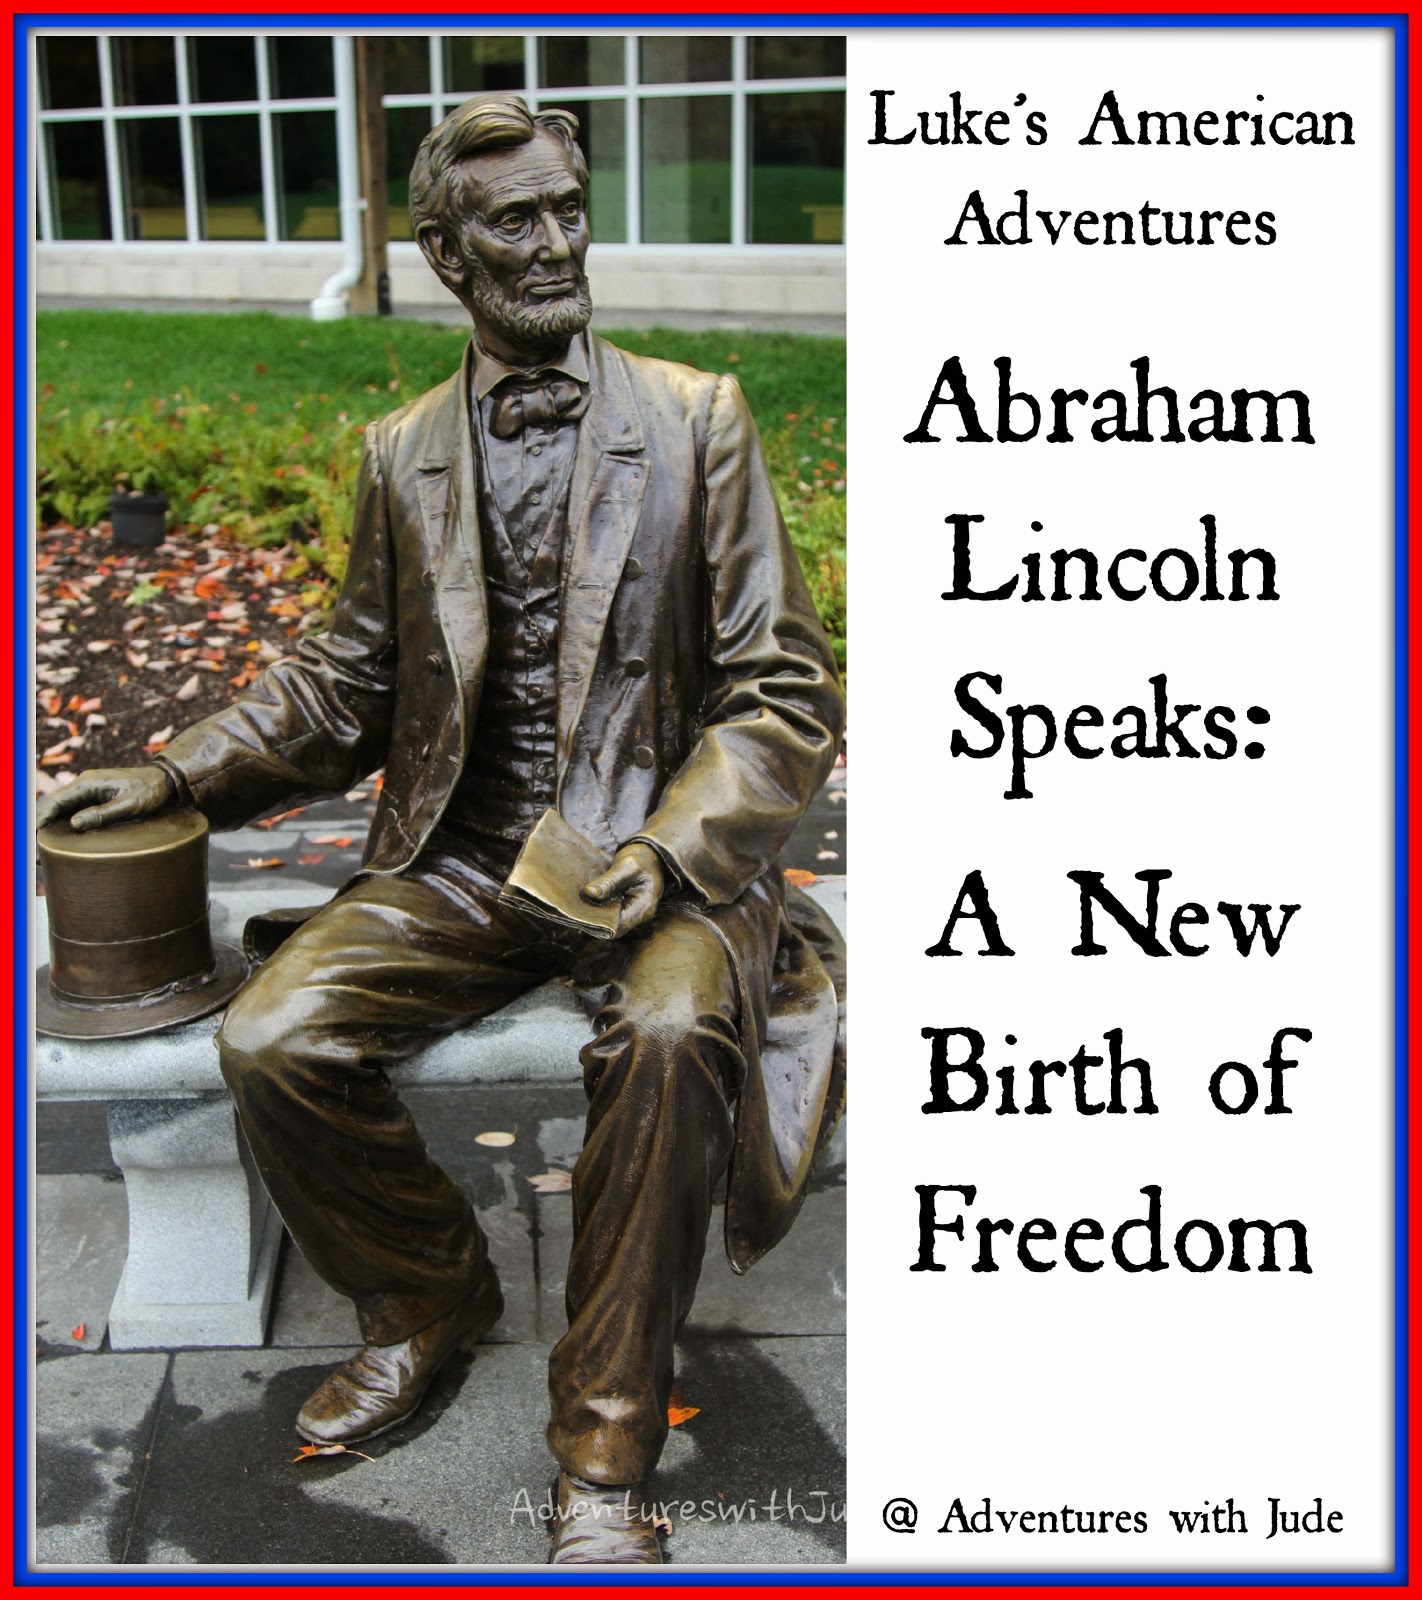 Abraham Lincoln Speaks: A New Birth of Freedom